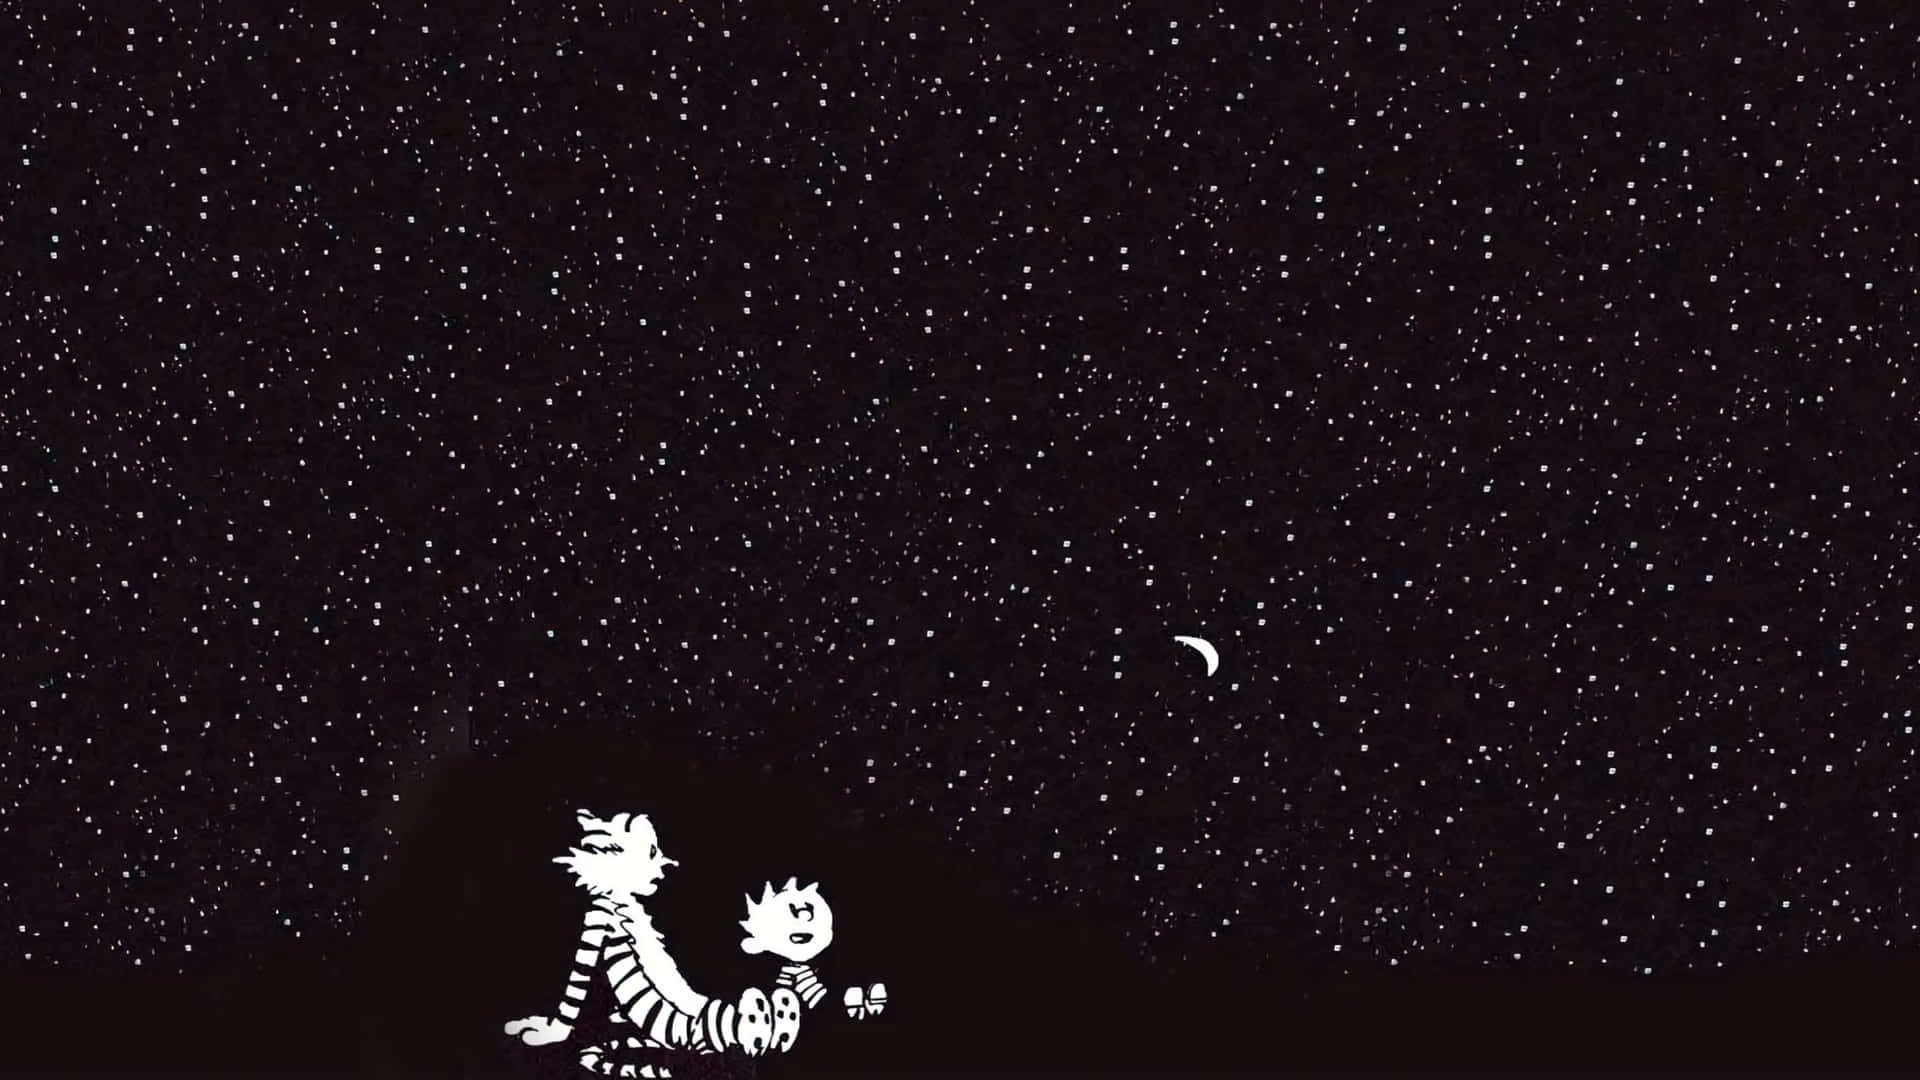 Enjoy the Adventure of Calvin and Hobbes Wallpaper